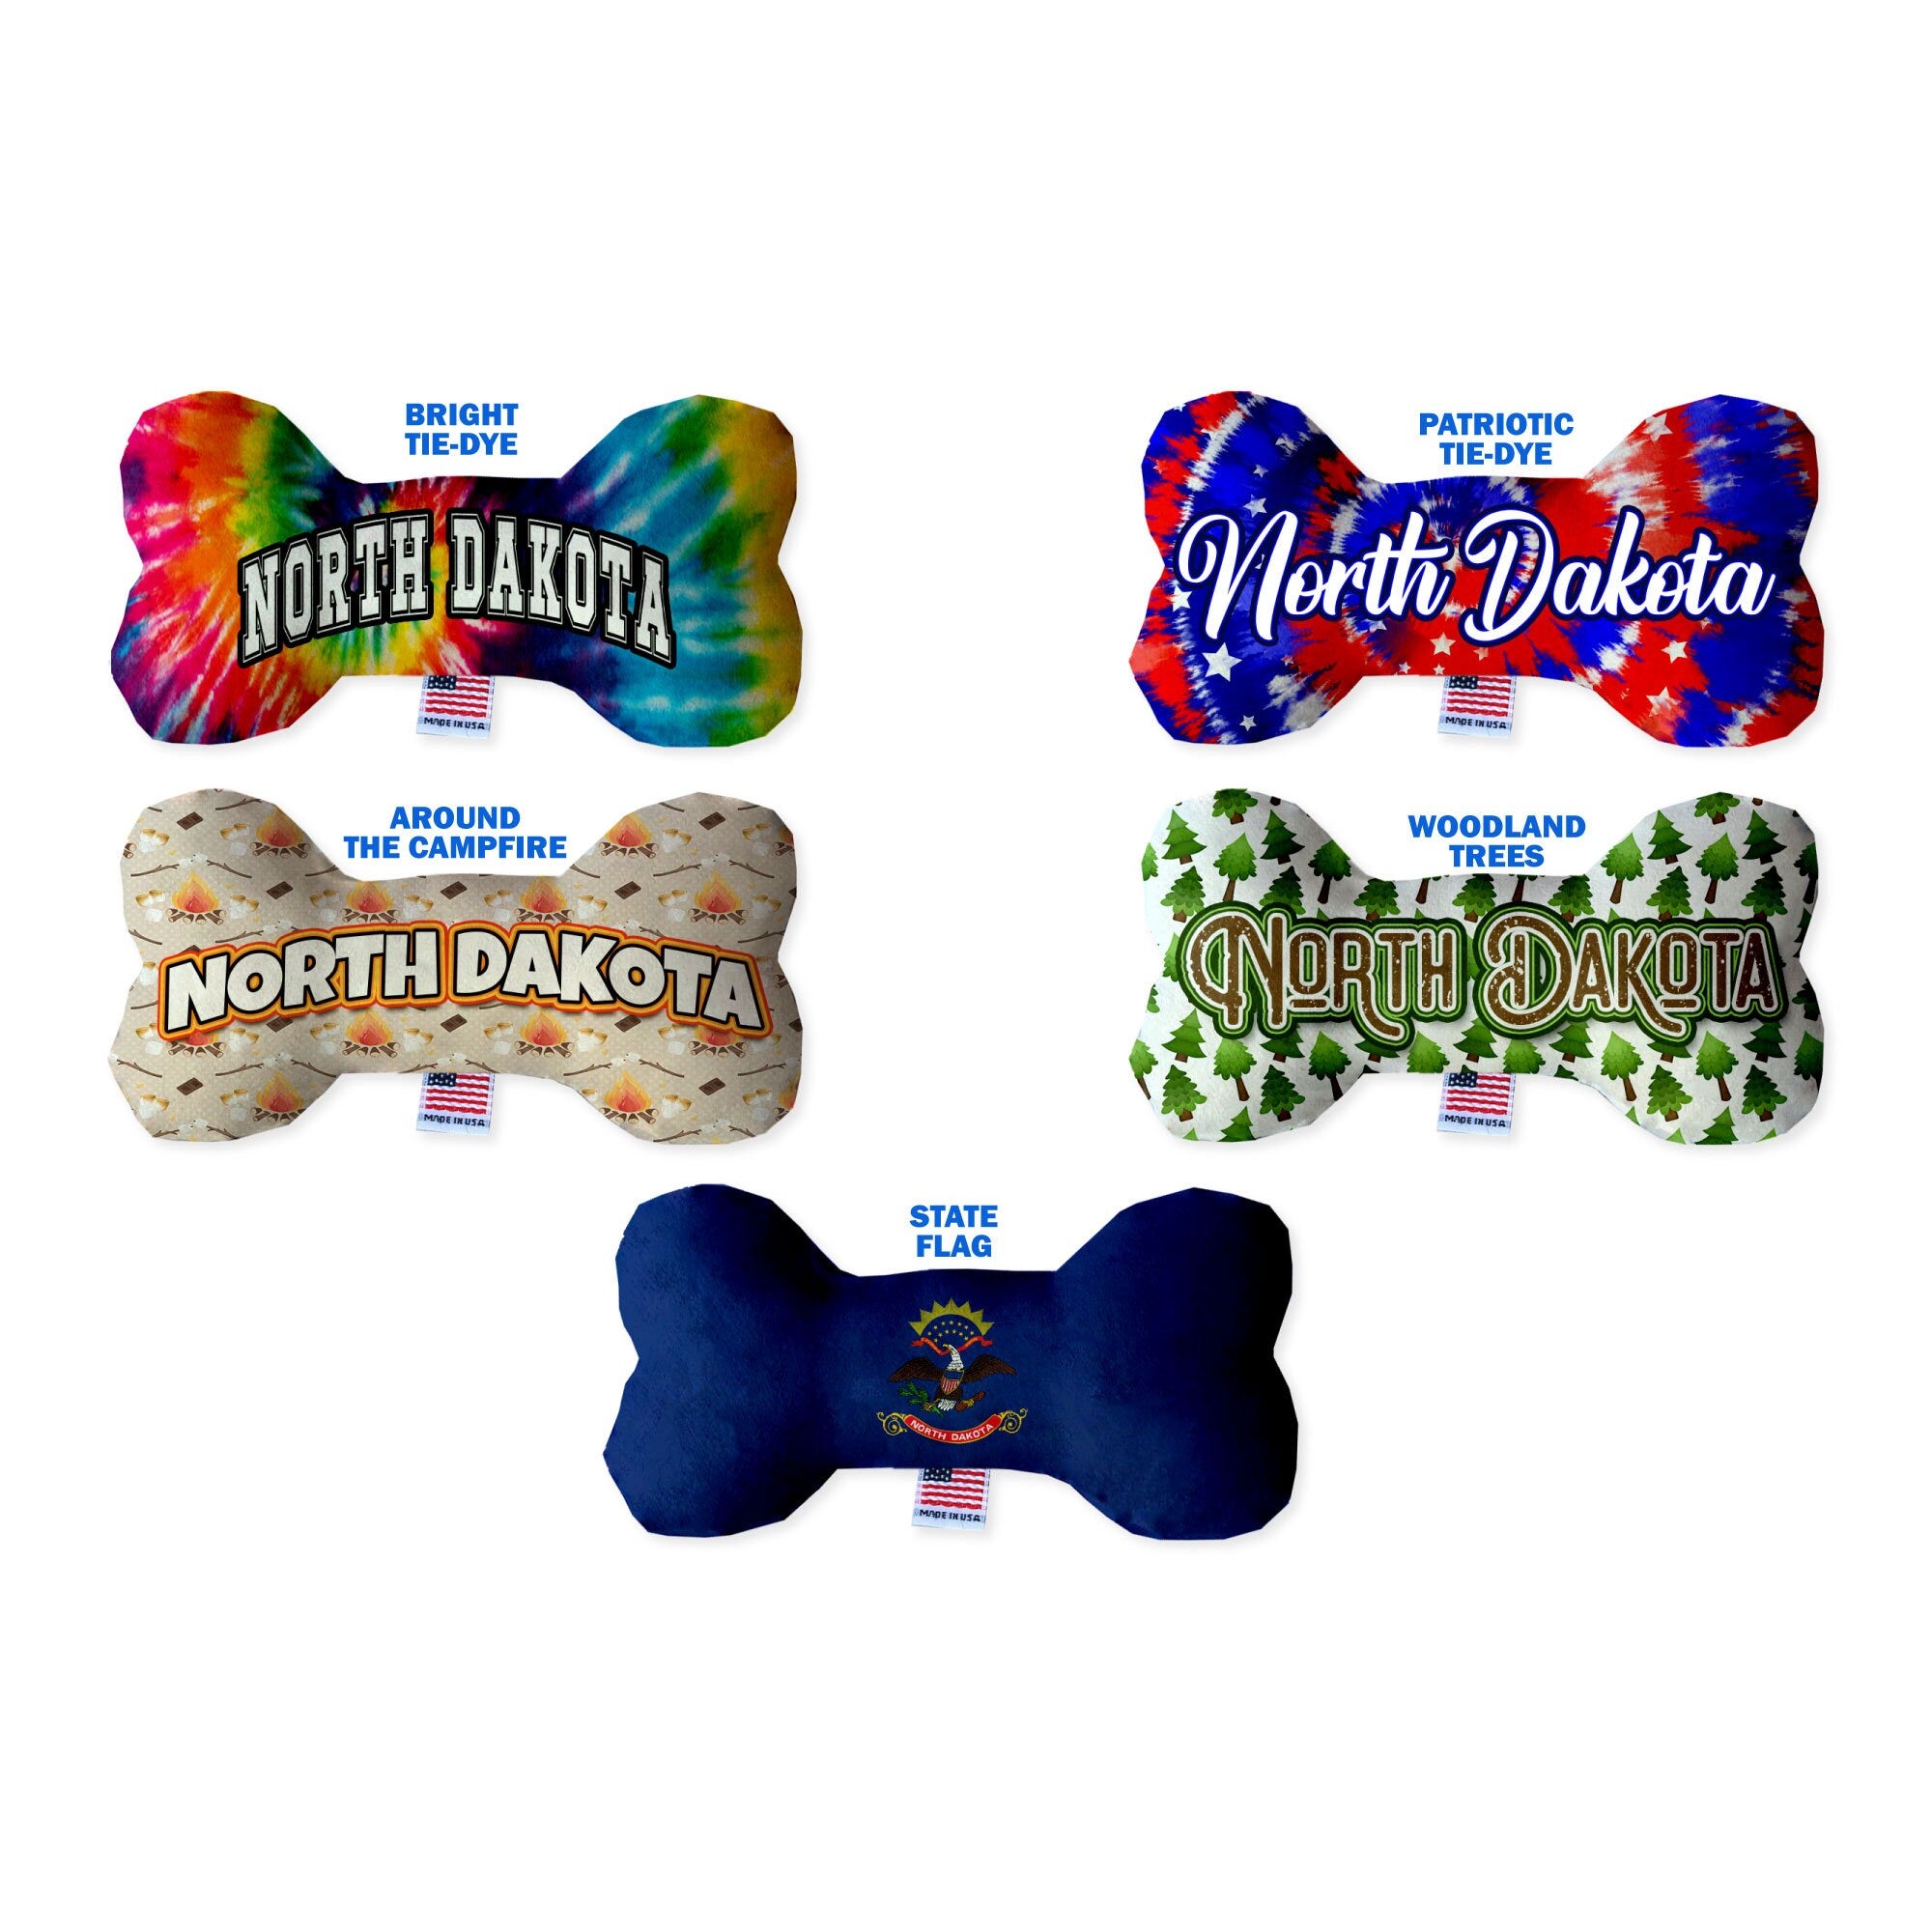 Pet & Dog Plush Bone Toys, "North Dakota State Options" (Available in different pattern options)